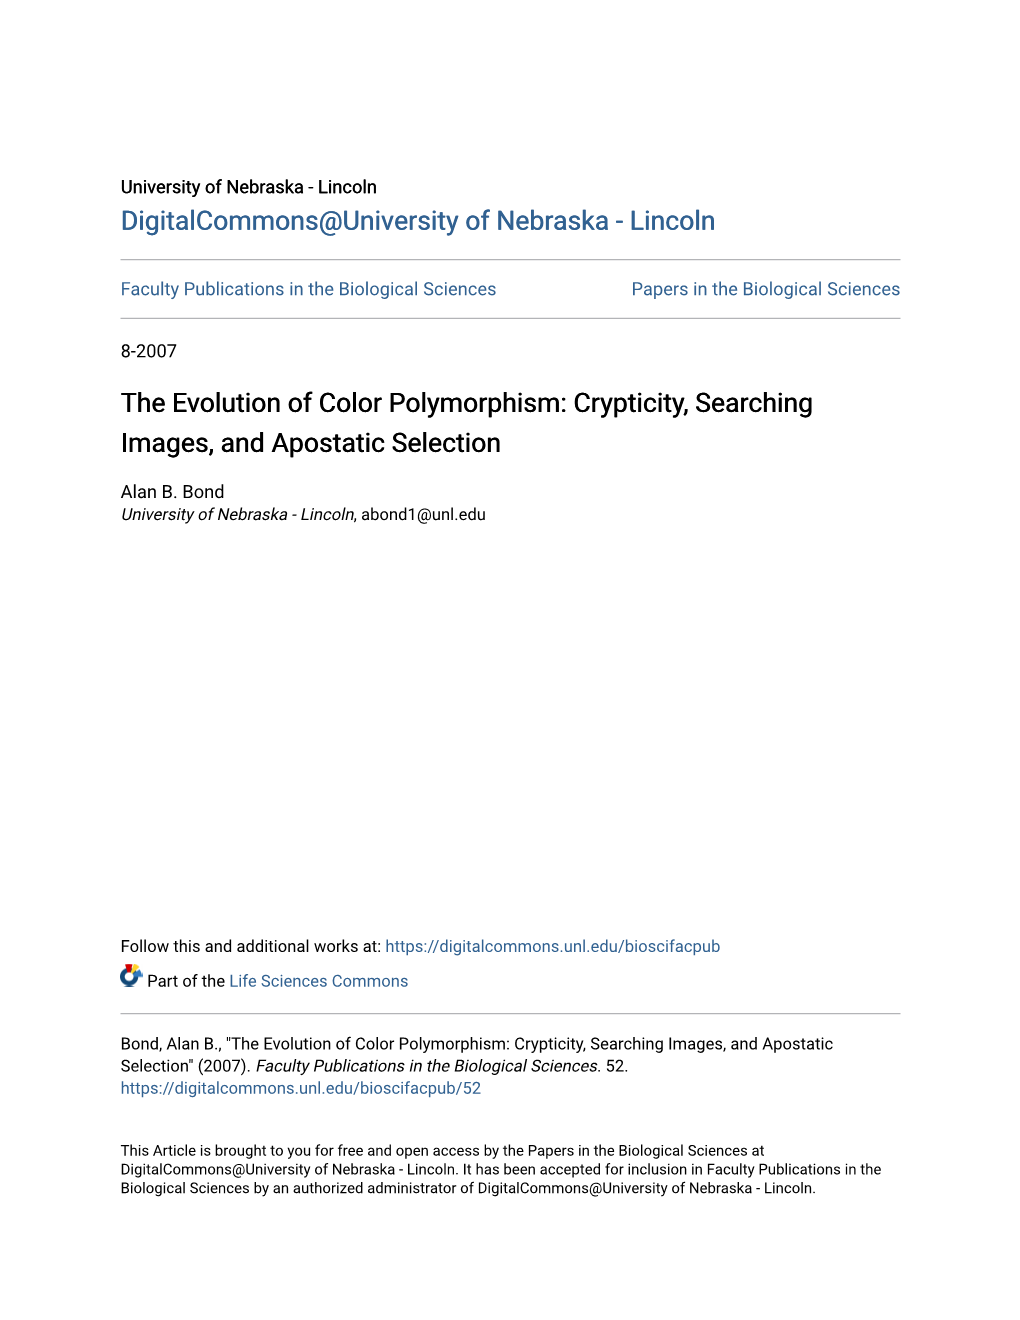 The Evolution of Color Polymorphism: Crypticity, Searching Images, and Apostatic Selection